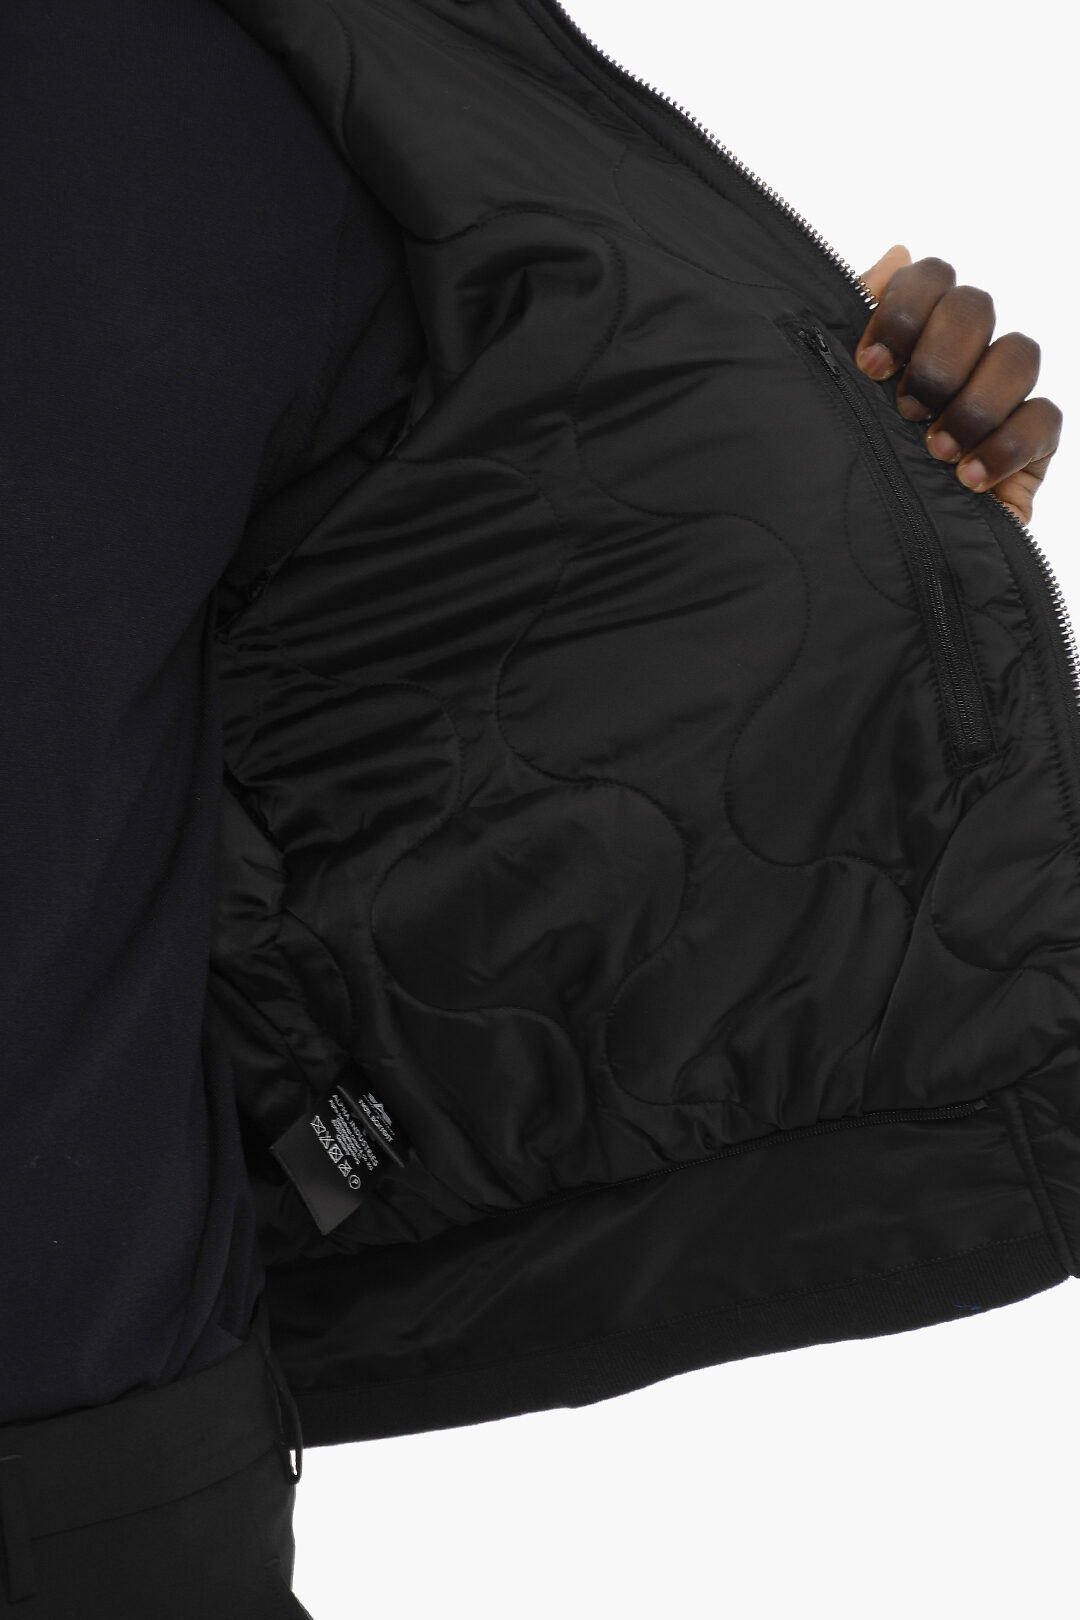 Neil Barrett ALPHA INDUSTRIES Padded HYBRID Jacket with Removable ...